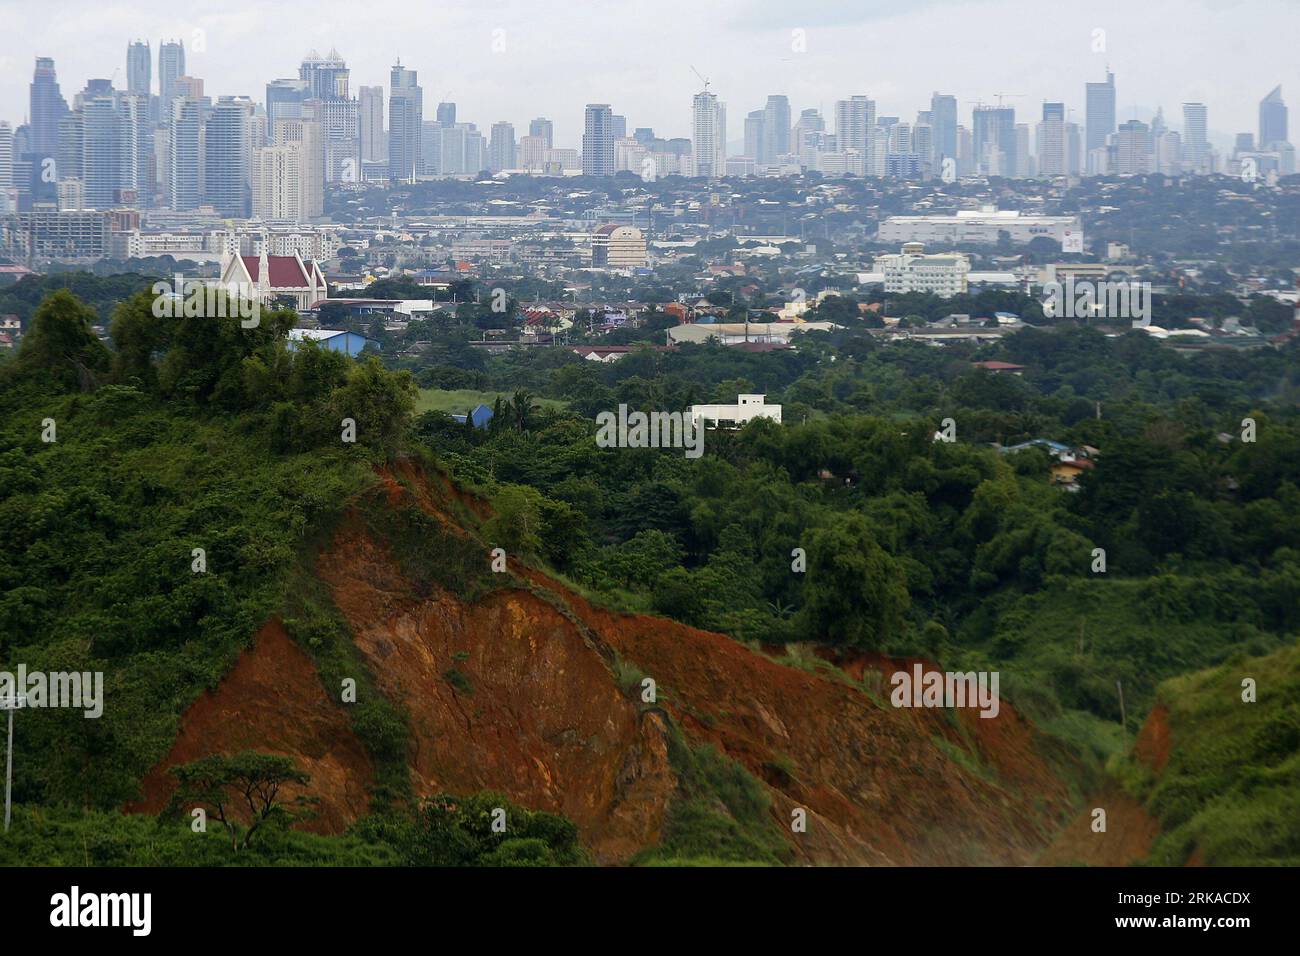 Bildnummer: 54311526  Datum: 18.08.2010  Copyright: imago/Xinhua (100818) -- MANILA, Aug. 18, 2010 (Xinhua) -- A hill is excavated as skyscrapers, residential villages and establishments around Makati City, Philippines, are seen in its background Aug. 18, 2010. The Philippine Atmospheric, Geophysic and Astronomical Services Administration warned the public about possible landslides due to a shallow low pressure area 60 kilometers northwest of Catarman, northern Samar. Some areas in the country that are prone to floods and landslides are inhabited by residents, according to the National Geohaza Stock Photo